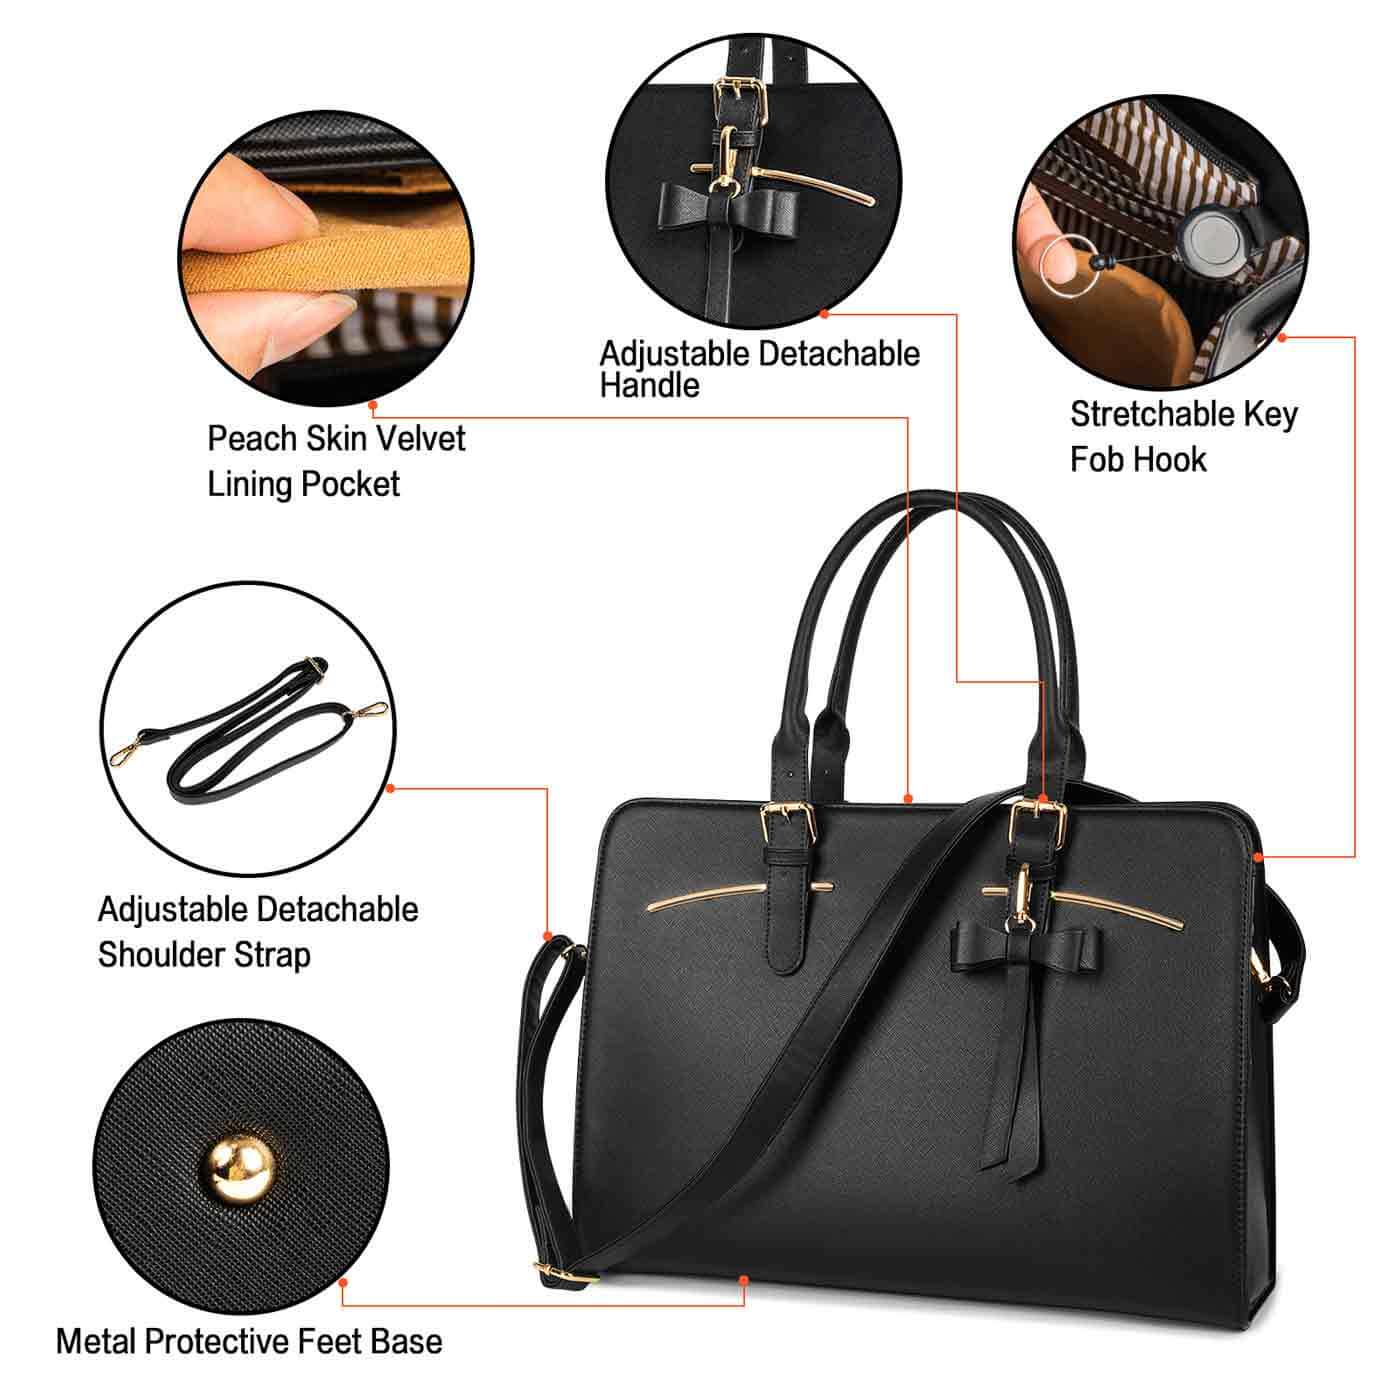 Laptop Bag for Women 15.6 inch Waterproof Lightweight Leather Laptop Tote Bag Womens Professional Business Office Work Bag Briefcase Computer Bag